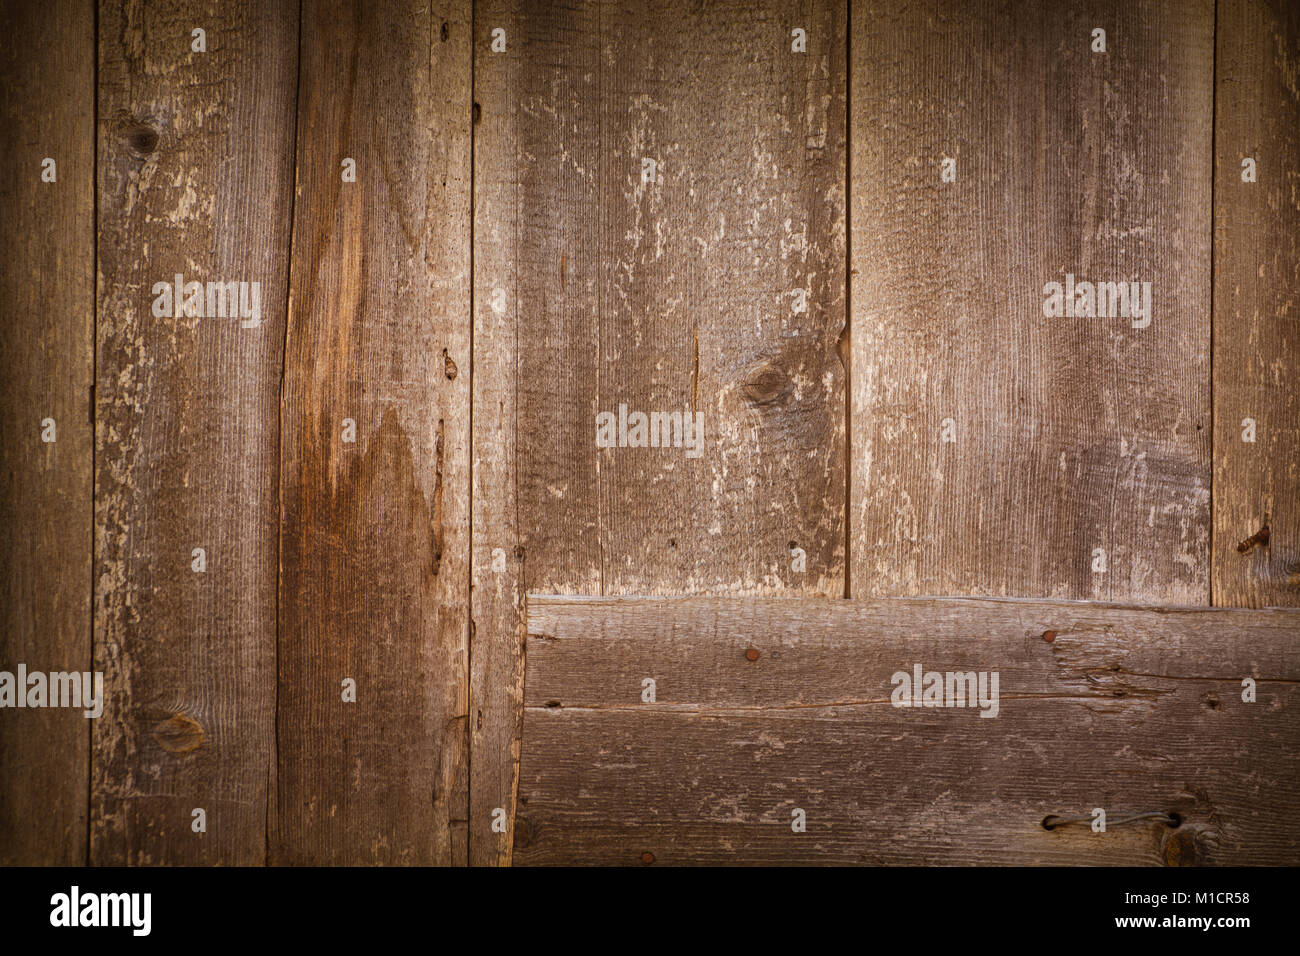 wood brown aged plank texture, vintage background Stock Photo